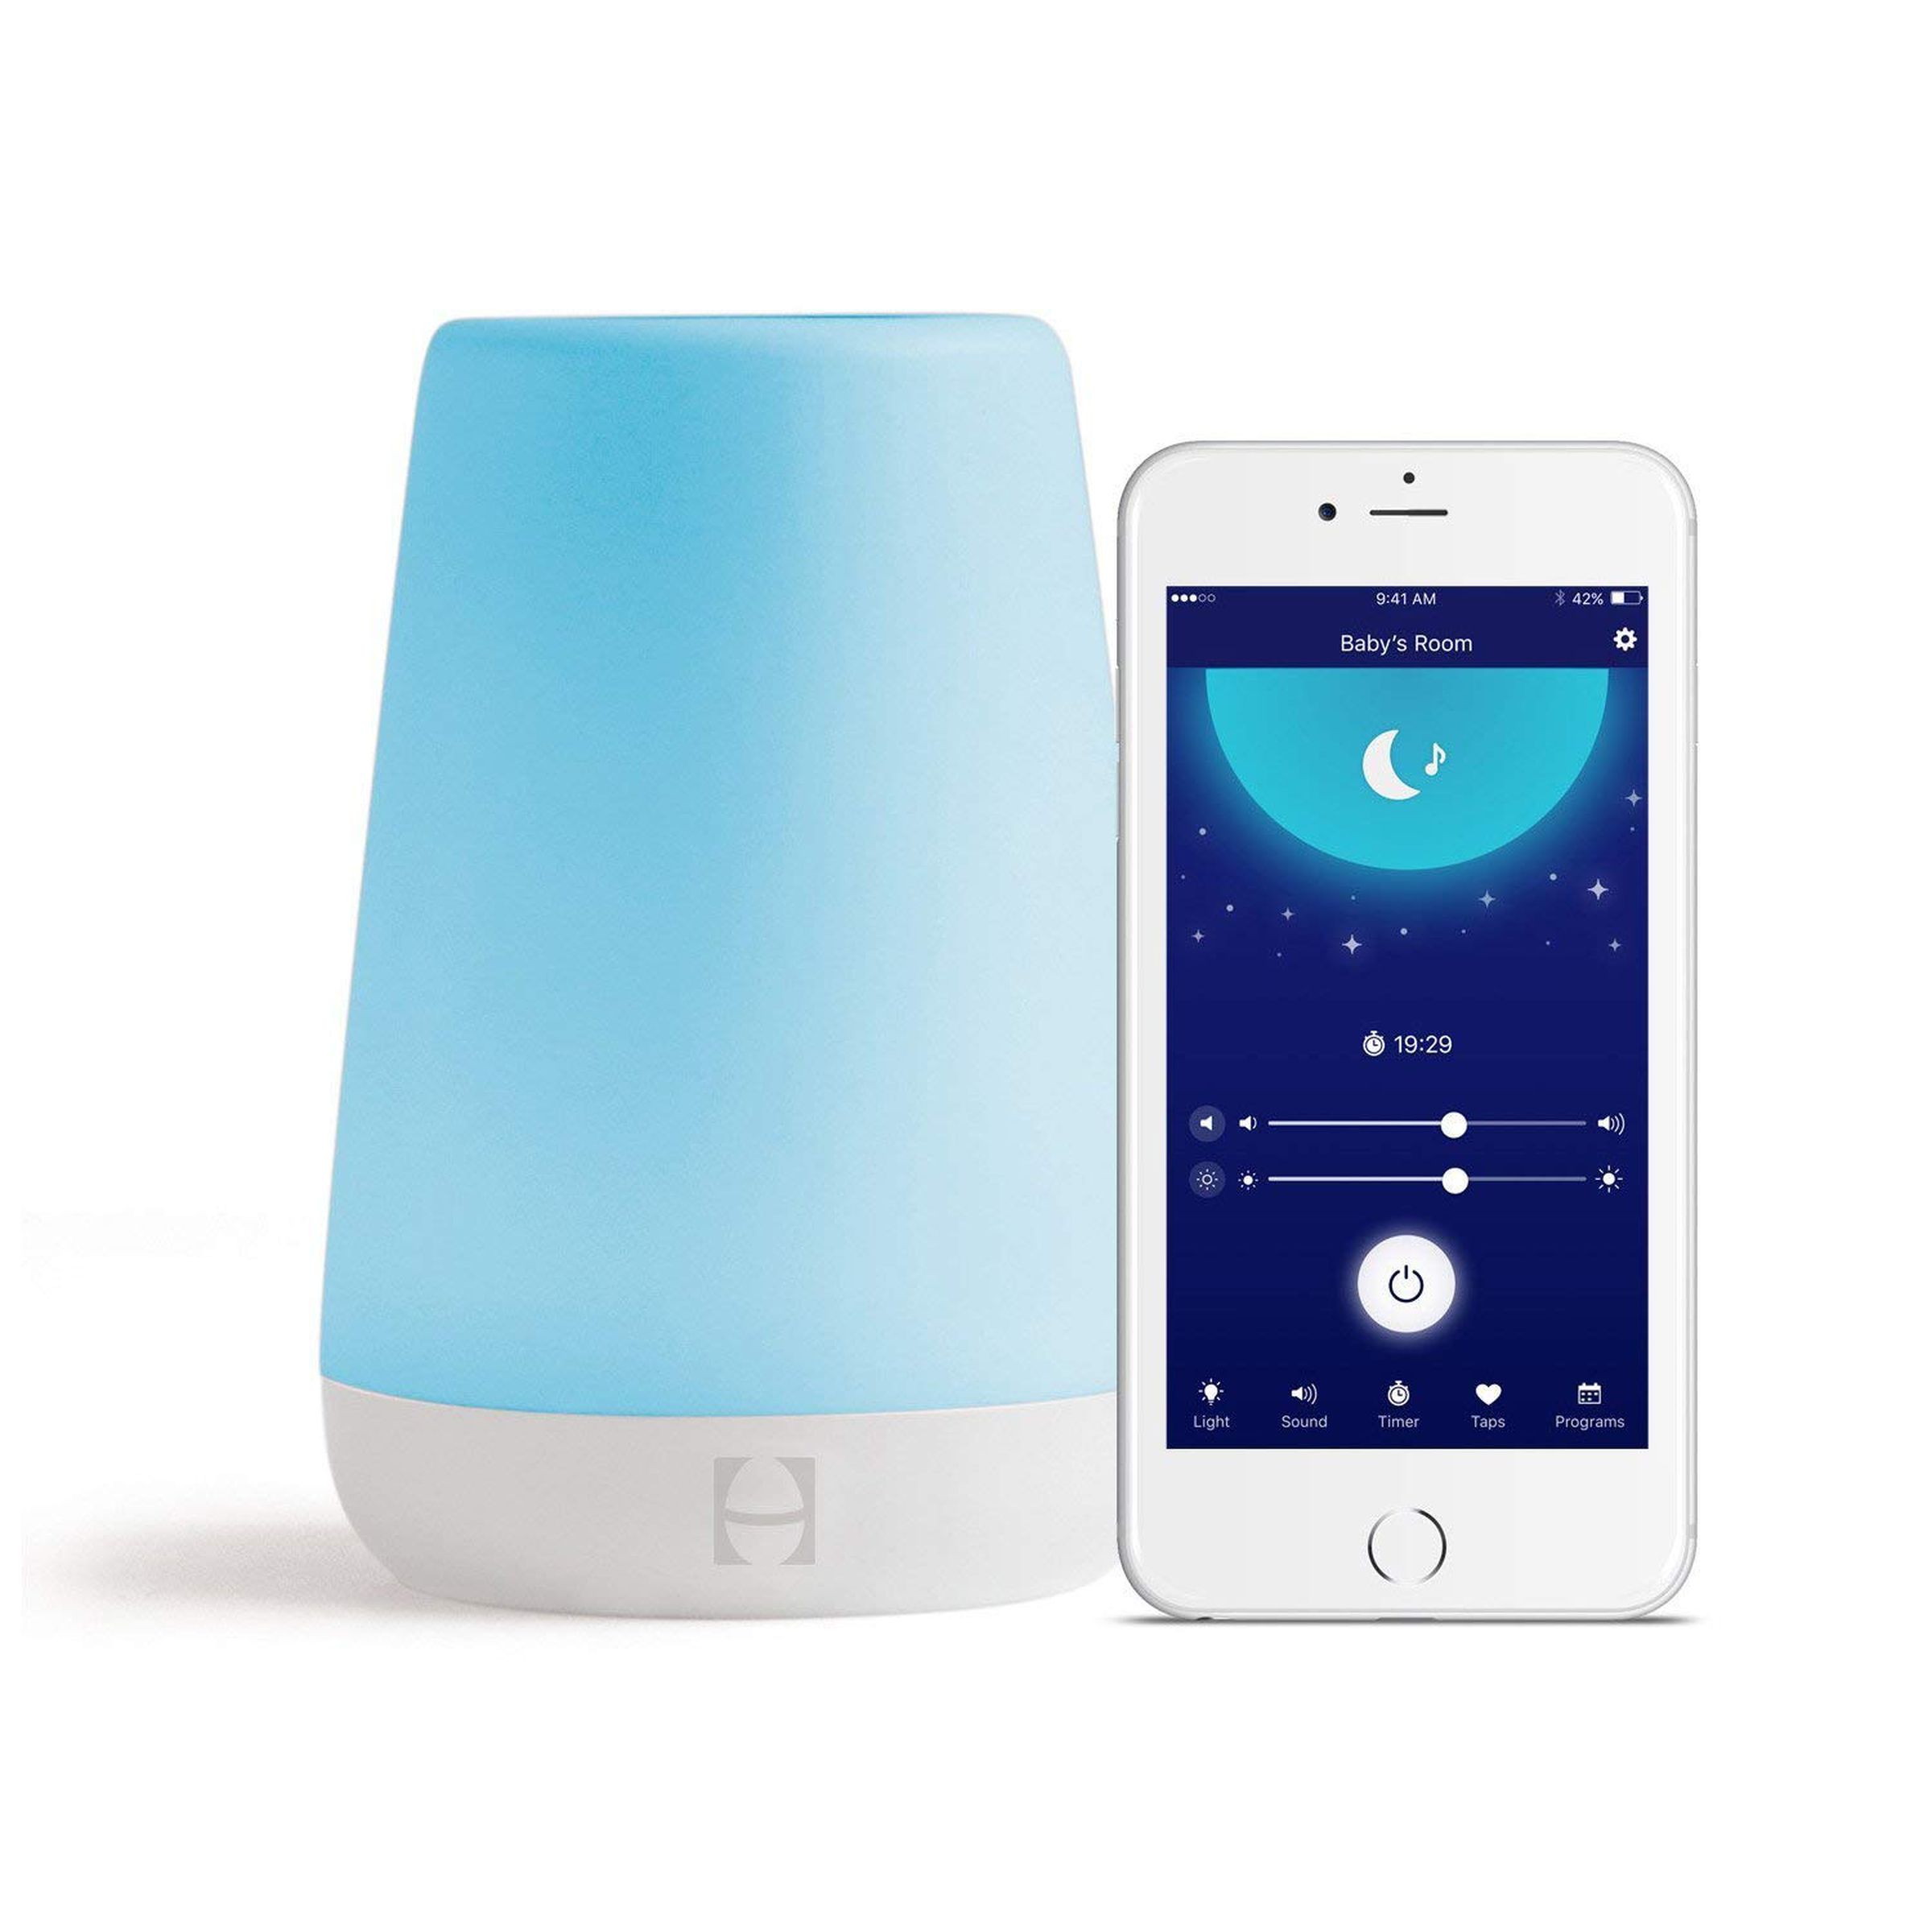 Hatch Baby, which makes a smart night light and changing pad, is receiving an Amazon investment through the Alexa Fund. It will be among the first companies to develop Alexa skills using the new API.